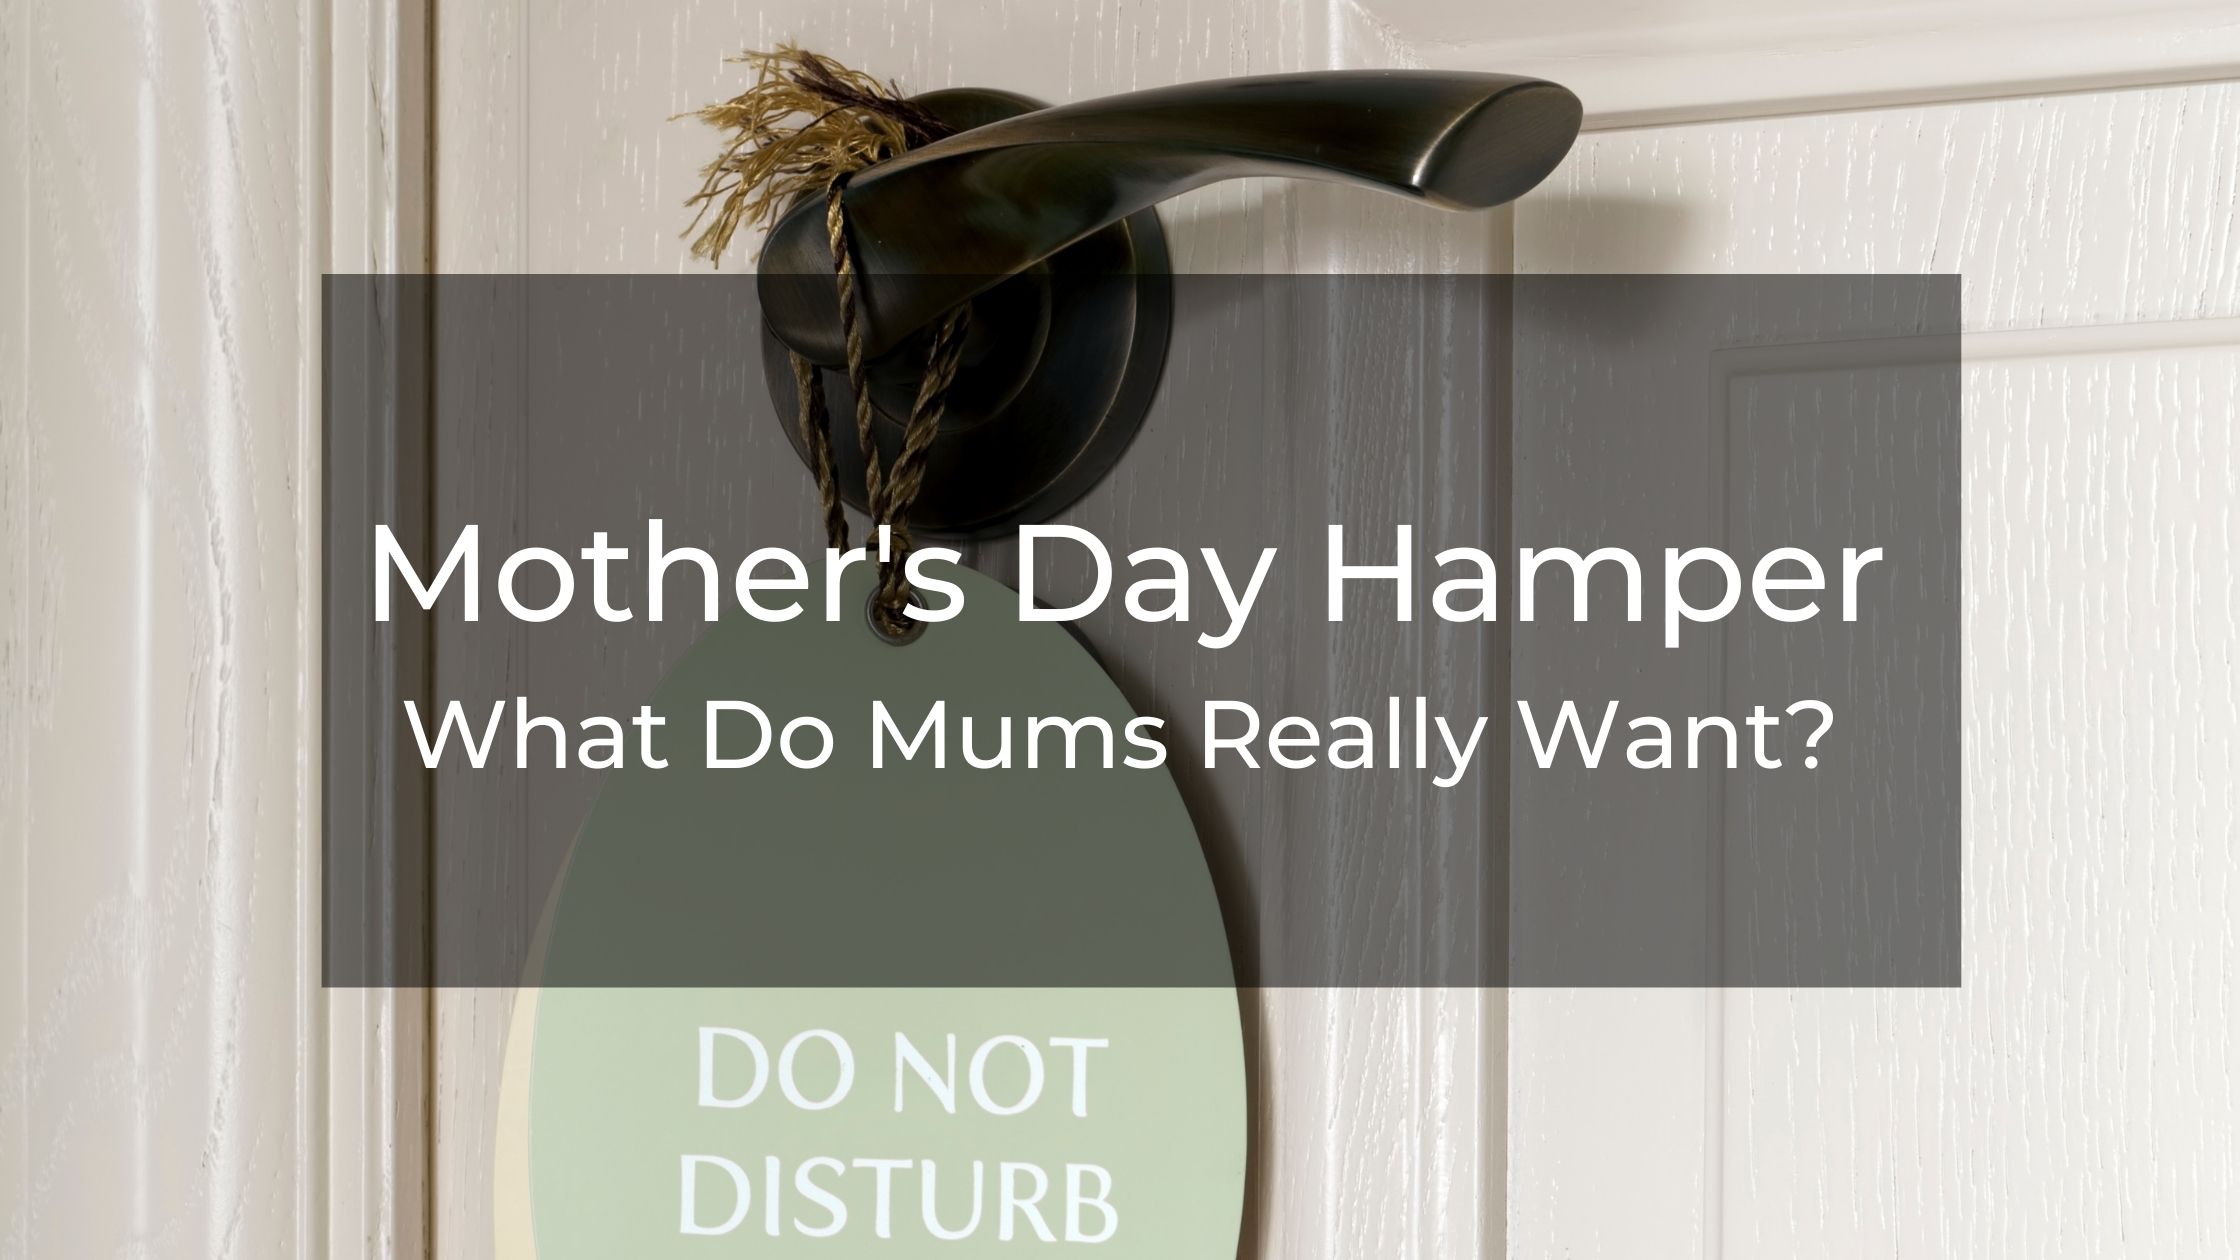 Mother's Day Hamper - What Do Mums Really Want